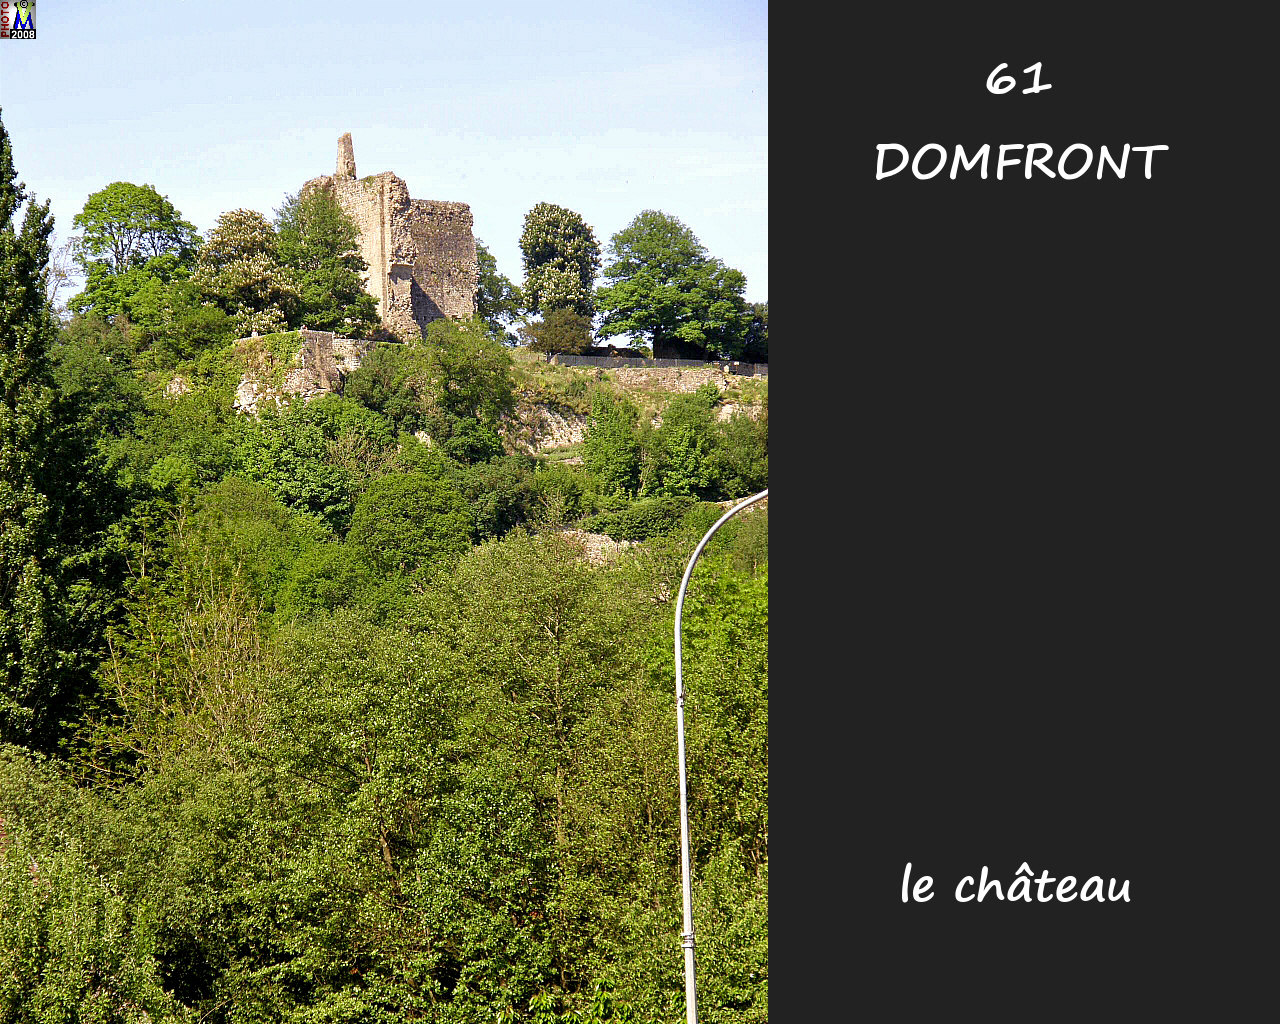 61DOMFRONT_chateau_100.jpg